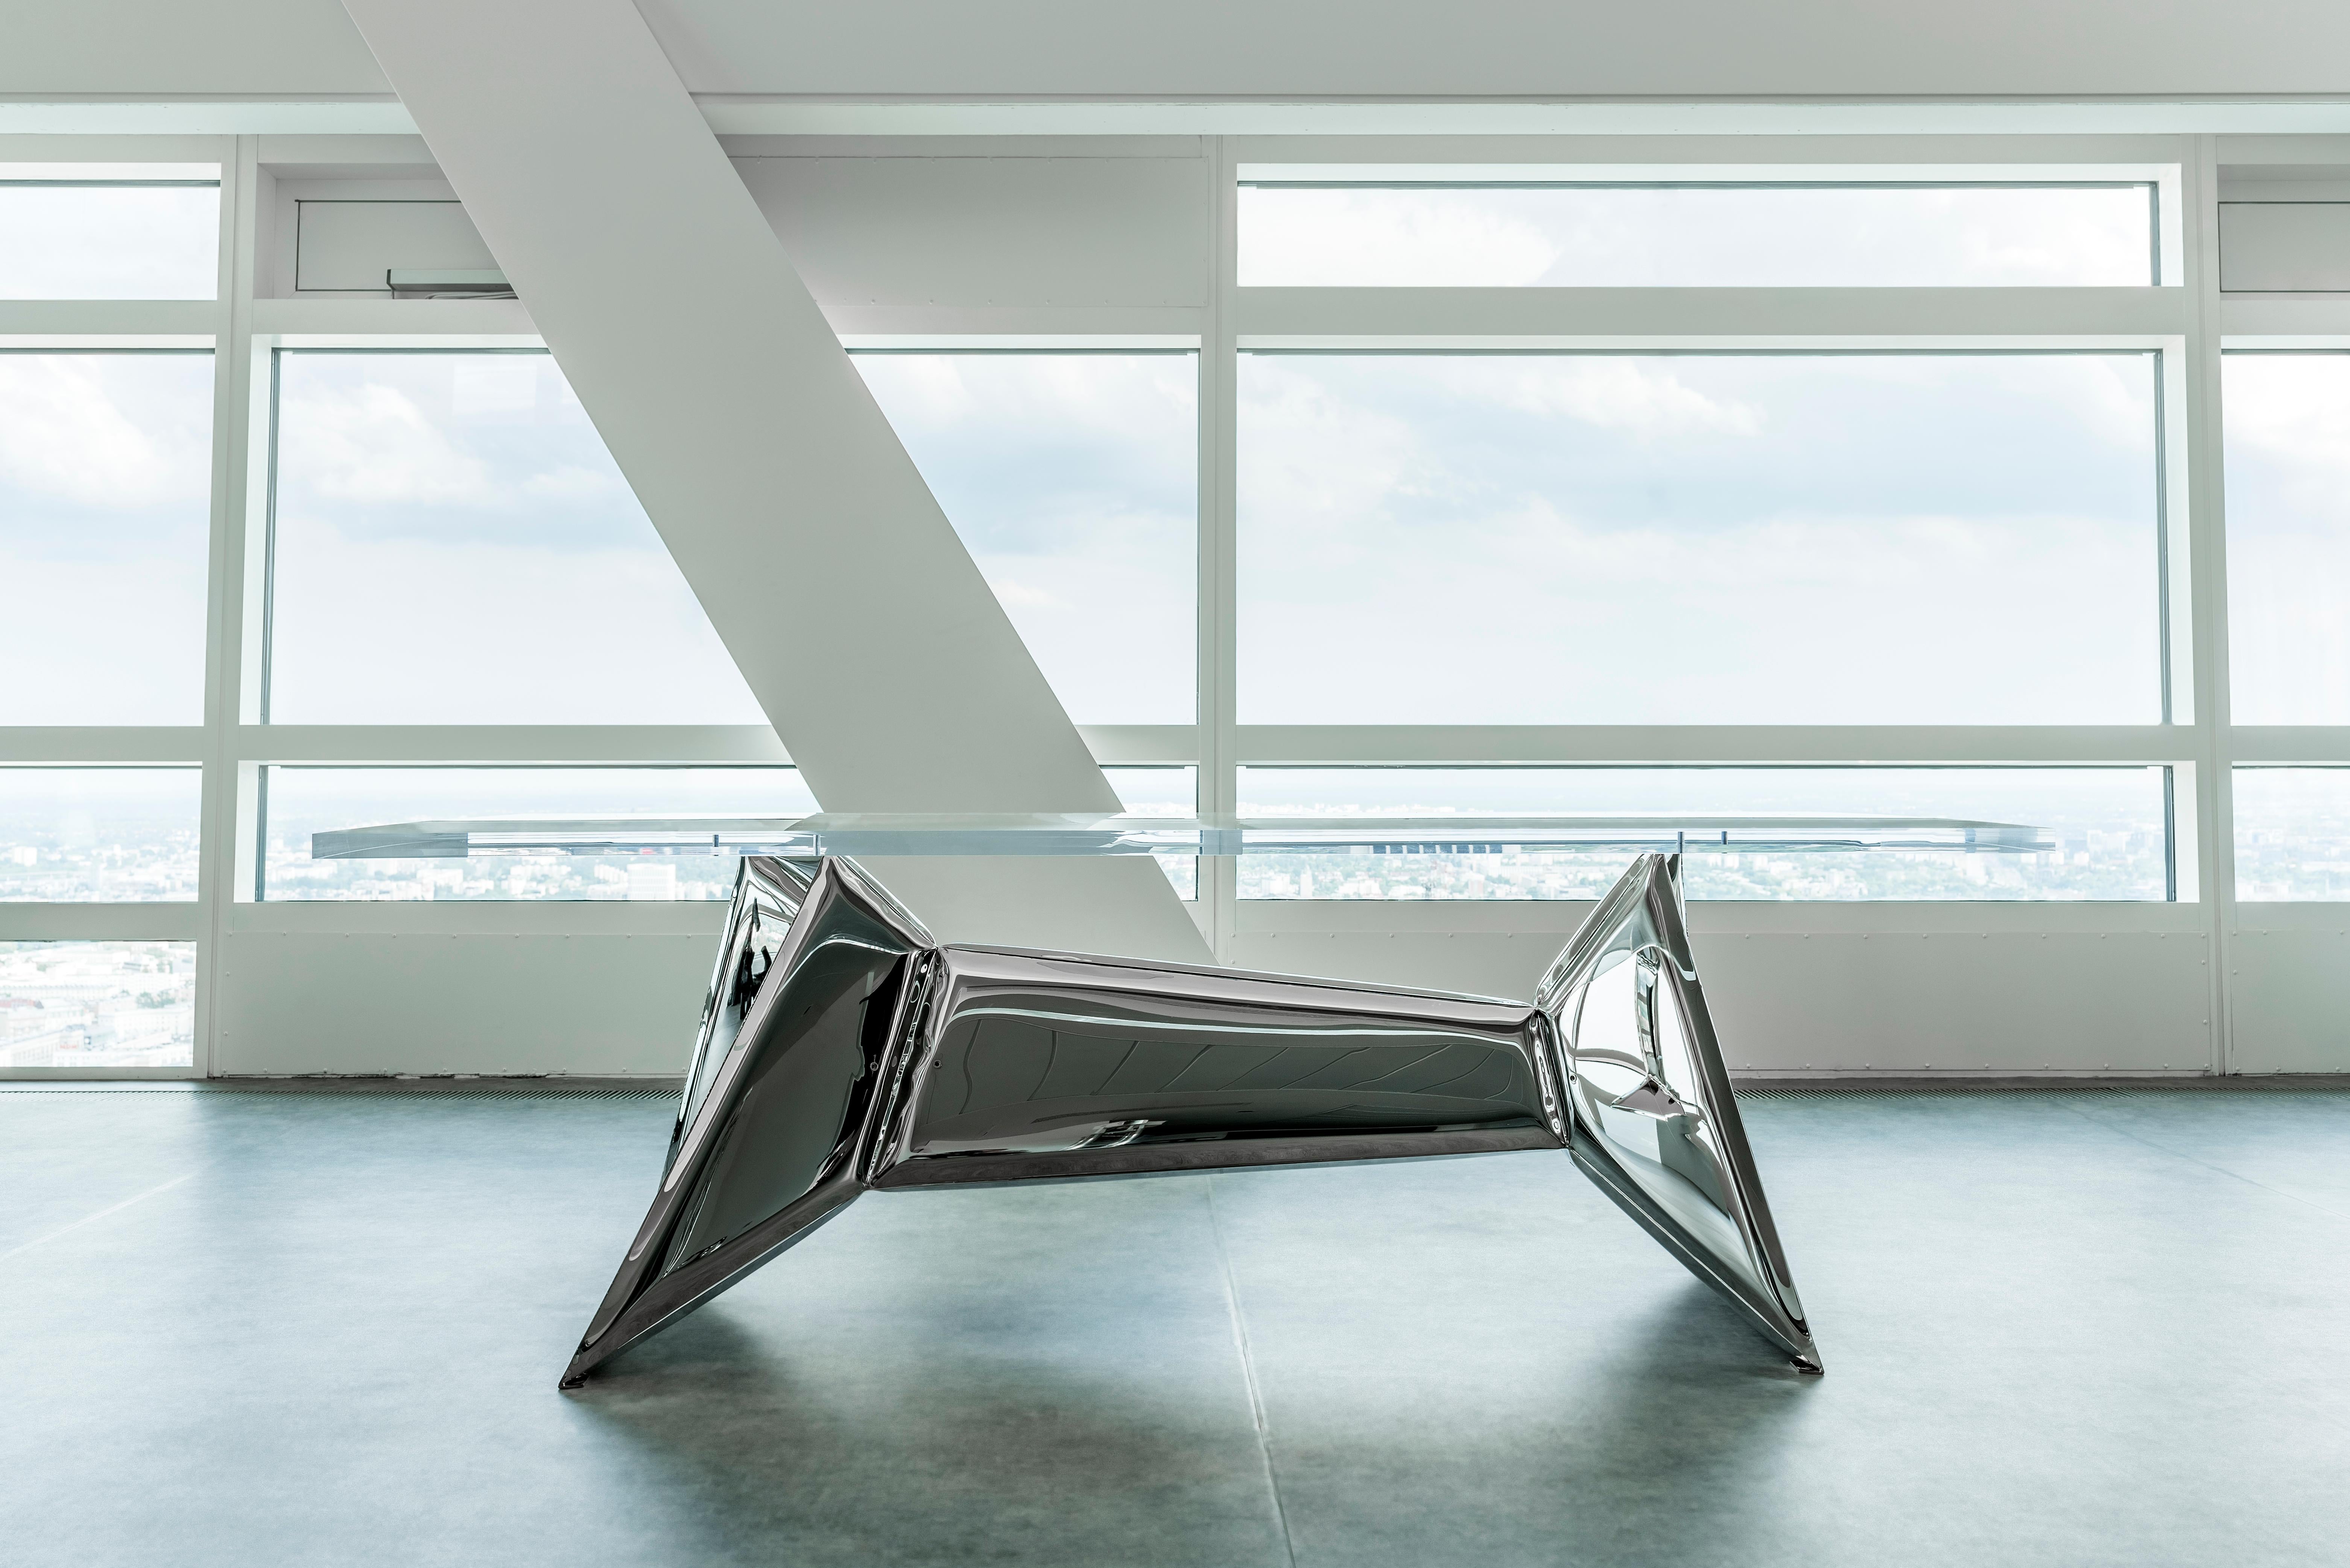 The Crystals table in stainless steel, Zieta
Dimensions: L 220 x W 110 x H 73 cm
Material: stainless steel and acrylic top.

Crystals is a series of mirrored objects combining geometric shapes with smooth, soft transitions of inflatable metal forms.